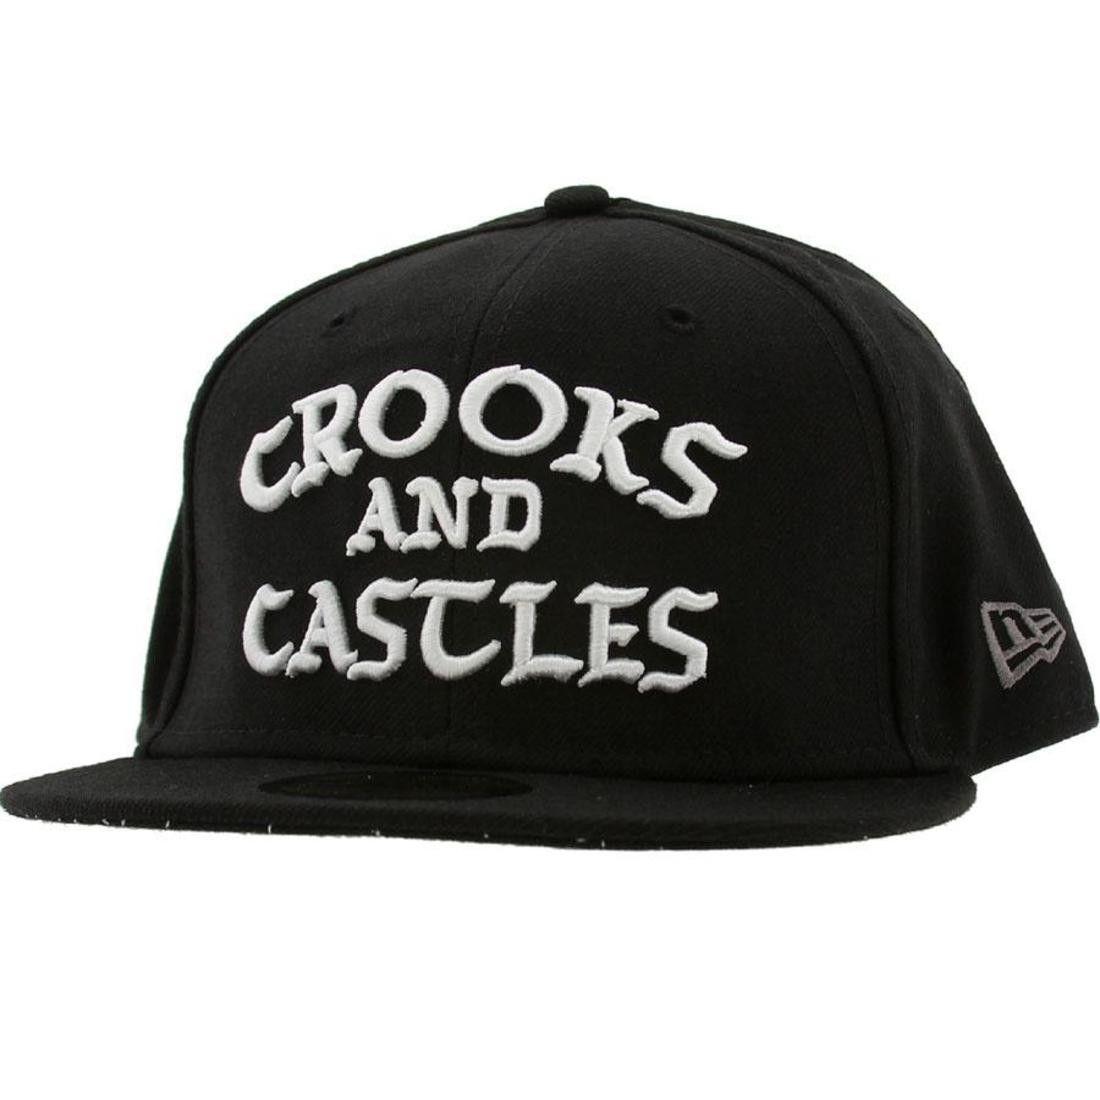 New Crooks and Castles Logo - Crooks and Castles Logo New Era Fitted Cap (black)